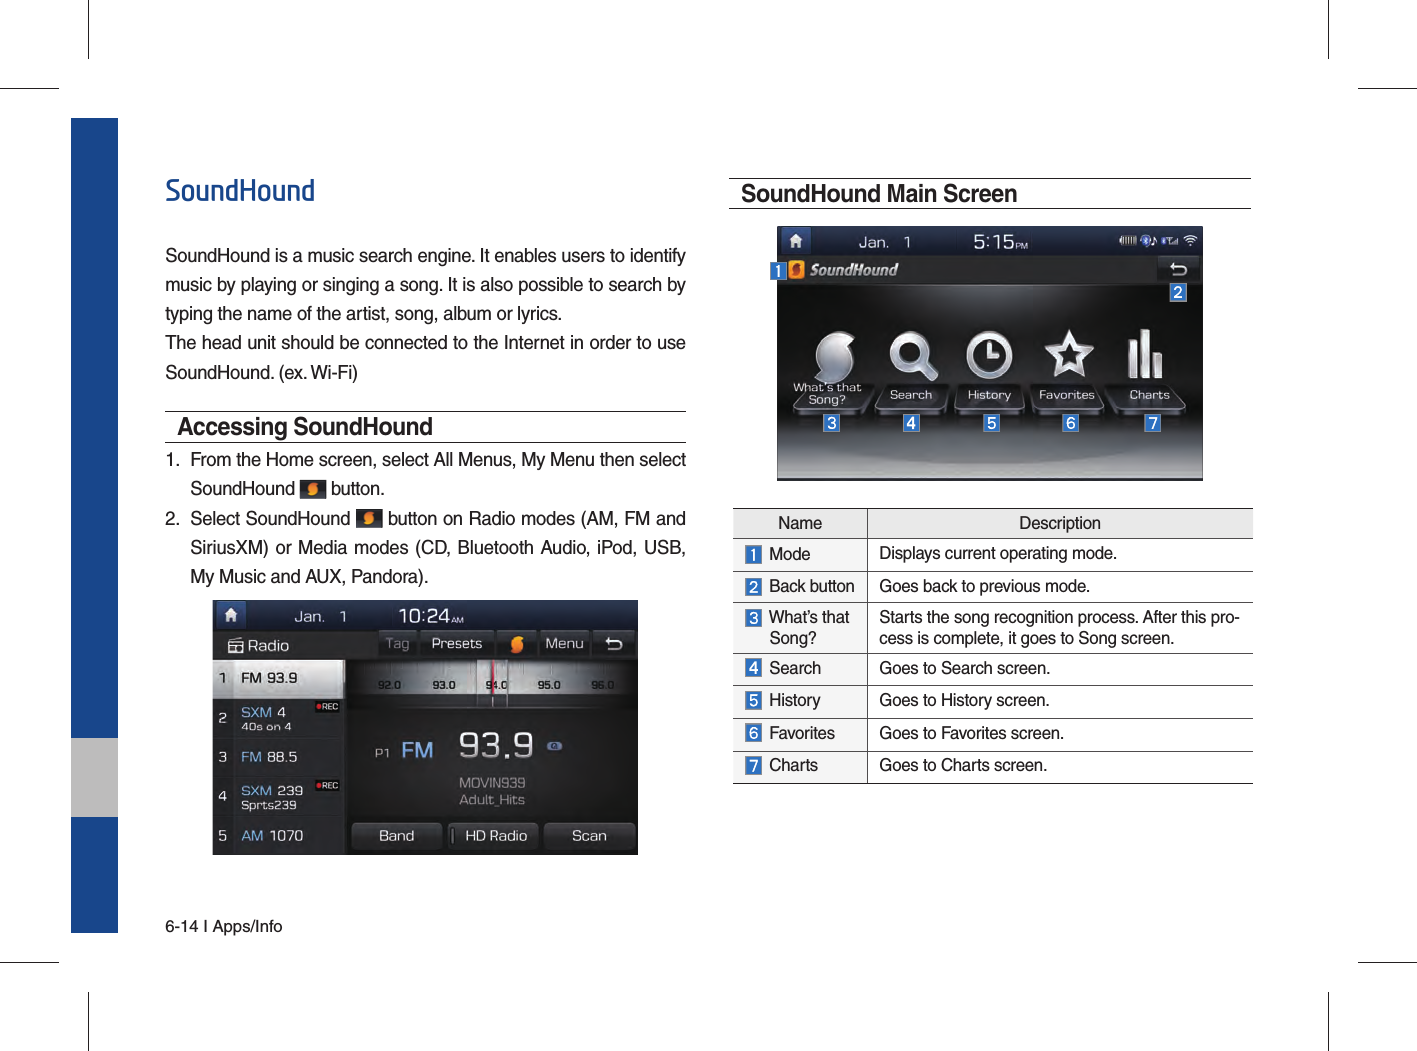 6-14 I Apps/InfoSoundHoundSoundHound is a music search engine. It enables users to identify music by playing or singing a song. It is also possible to search by typing the name of the artist, song, album or lyrics.The head unit should be connected to the Internet in order to use SoundHound. (ex. Wi-Fi)Accessing SoundHound 1.  From the Home screen, select All Menus, My Menu then select SoundHound   button.2.  Select SoundHound   button on Radio modes (AM, FM and SiriusXM) or Media modes (CD, Bluetooth Audio, iPod, USB, My Music and AUX, Pandora). SoundHound Main ScreenName Description Mode Displays current operating mode.  Back button Goes back to previous mode.  What’s that  Song? Starts the song recognition process. After this pro-cess is complete, it goes to Song screen.  Search Goes to Search screen. History Goes to History screen.  Favorites Goes to Favorites screen. Charts Goes to Charts screen.